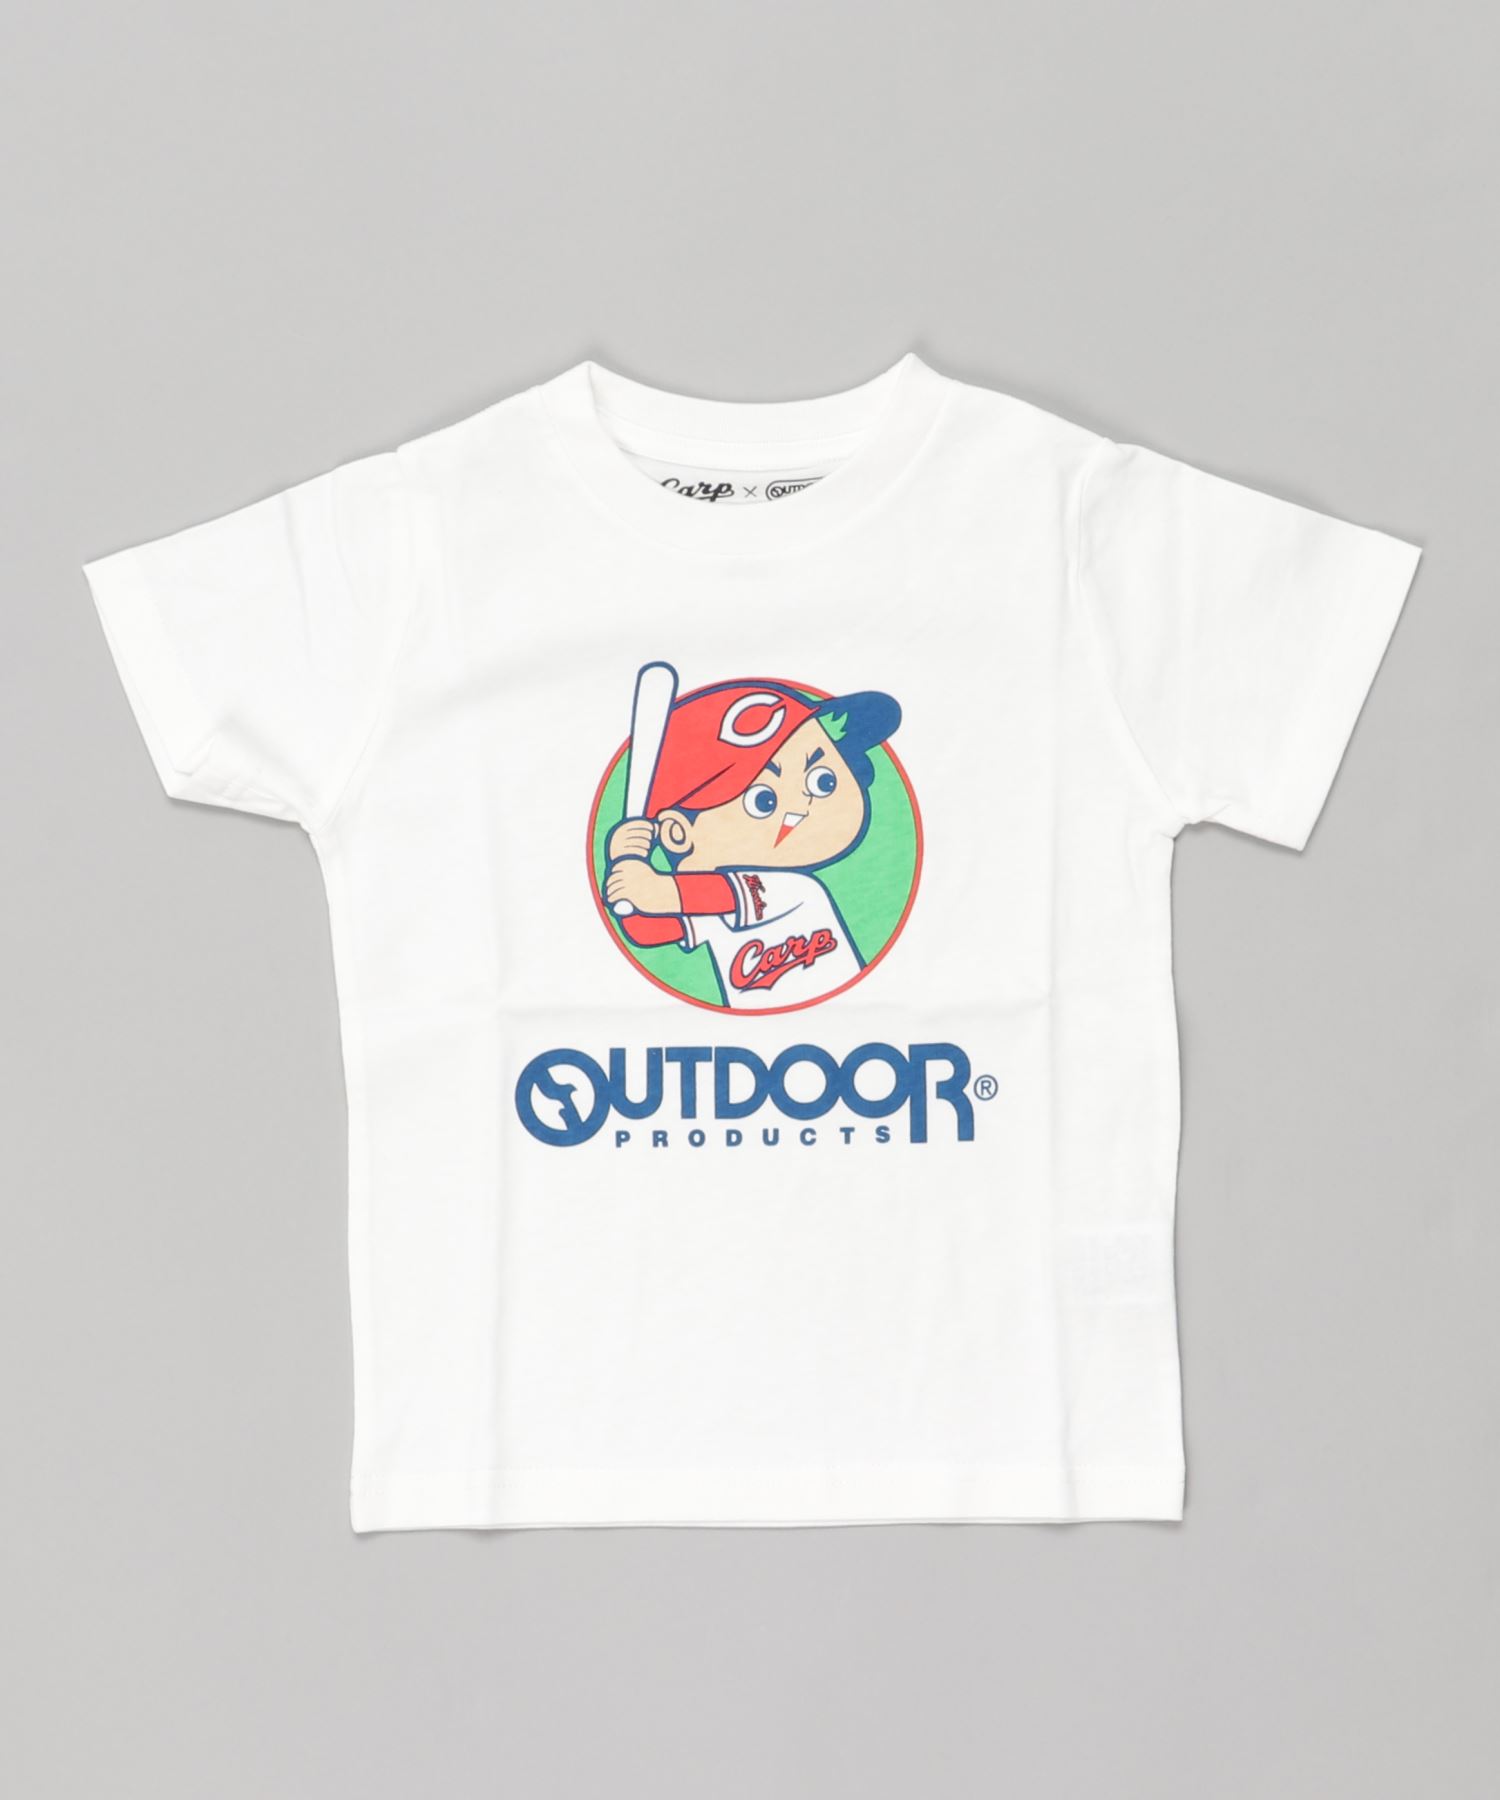 ｋｉｄｓカープコラボｔ１ カープ坊や Outdoor Products Apparel アウトドアプロダクツ Outdoor Products 公式通販サイト